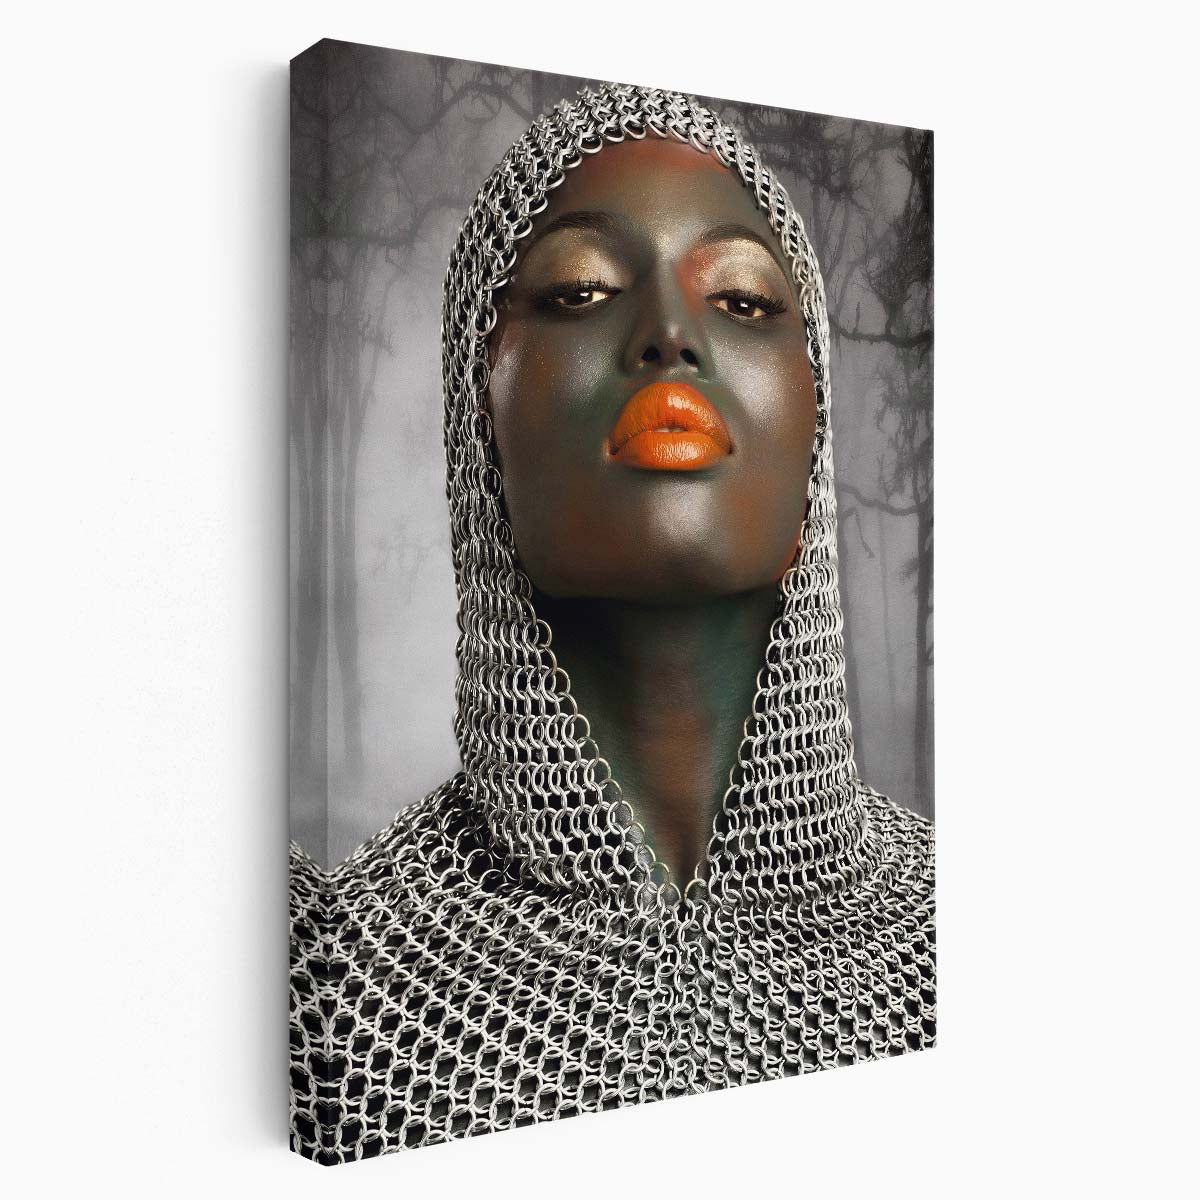 Medieval Warrior Woman Photography Mysterious Forest Chainmail Portrait by Luxuriance Designs, made in USA